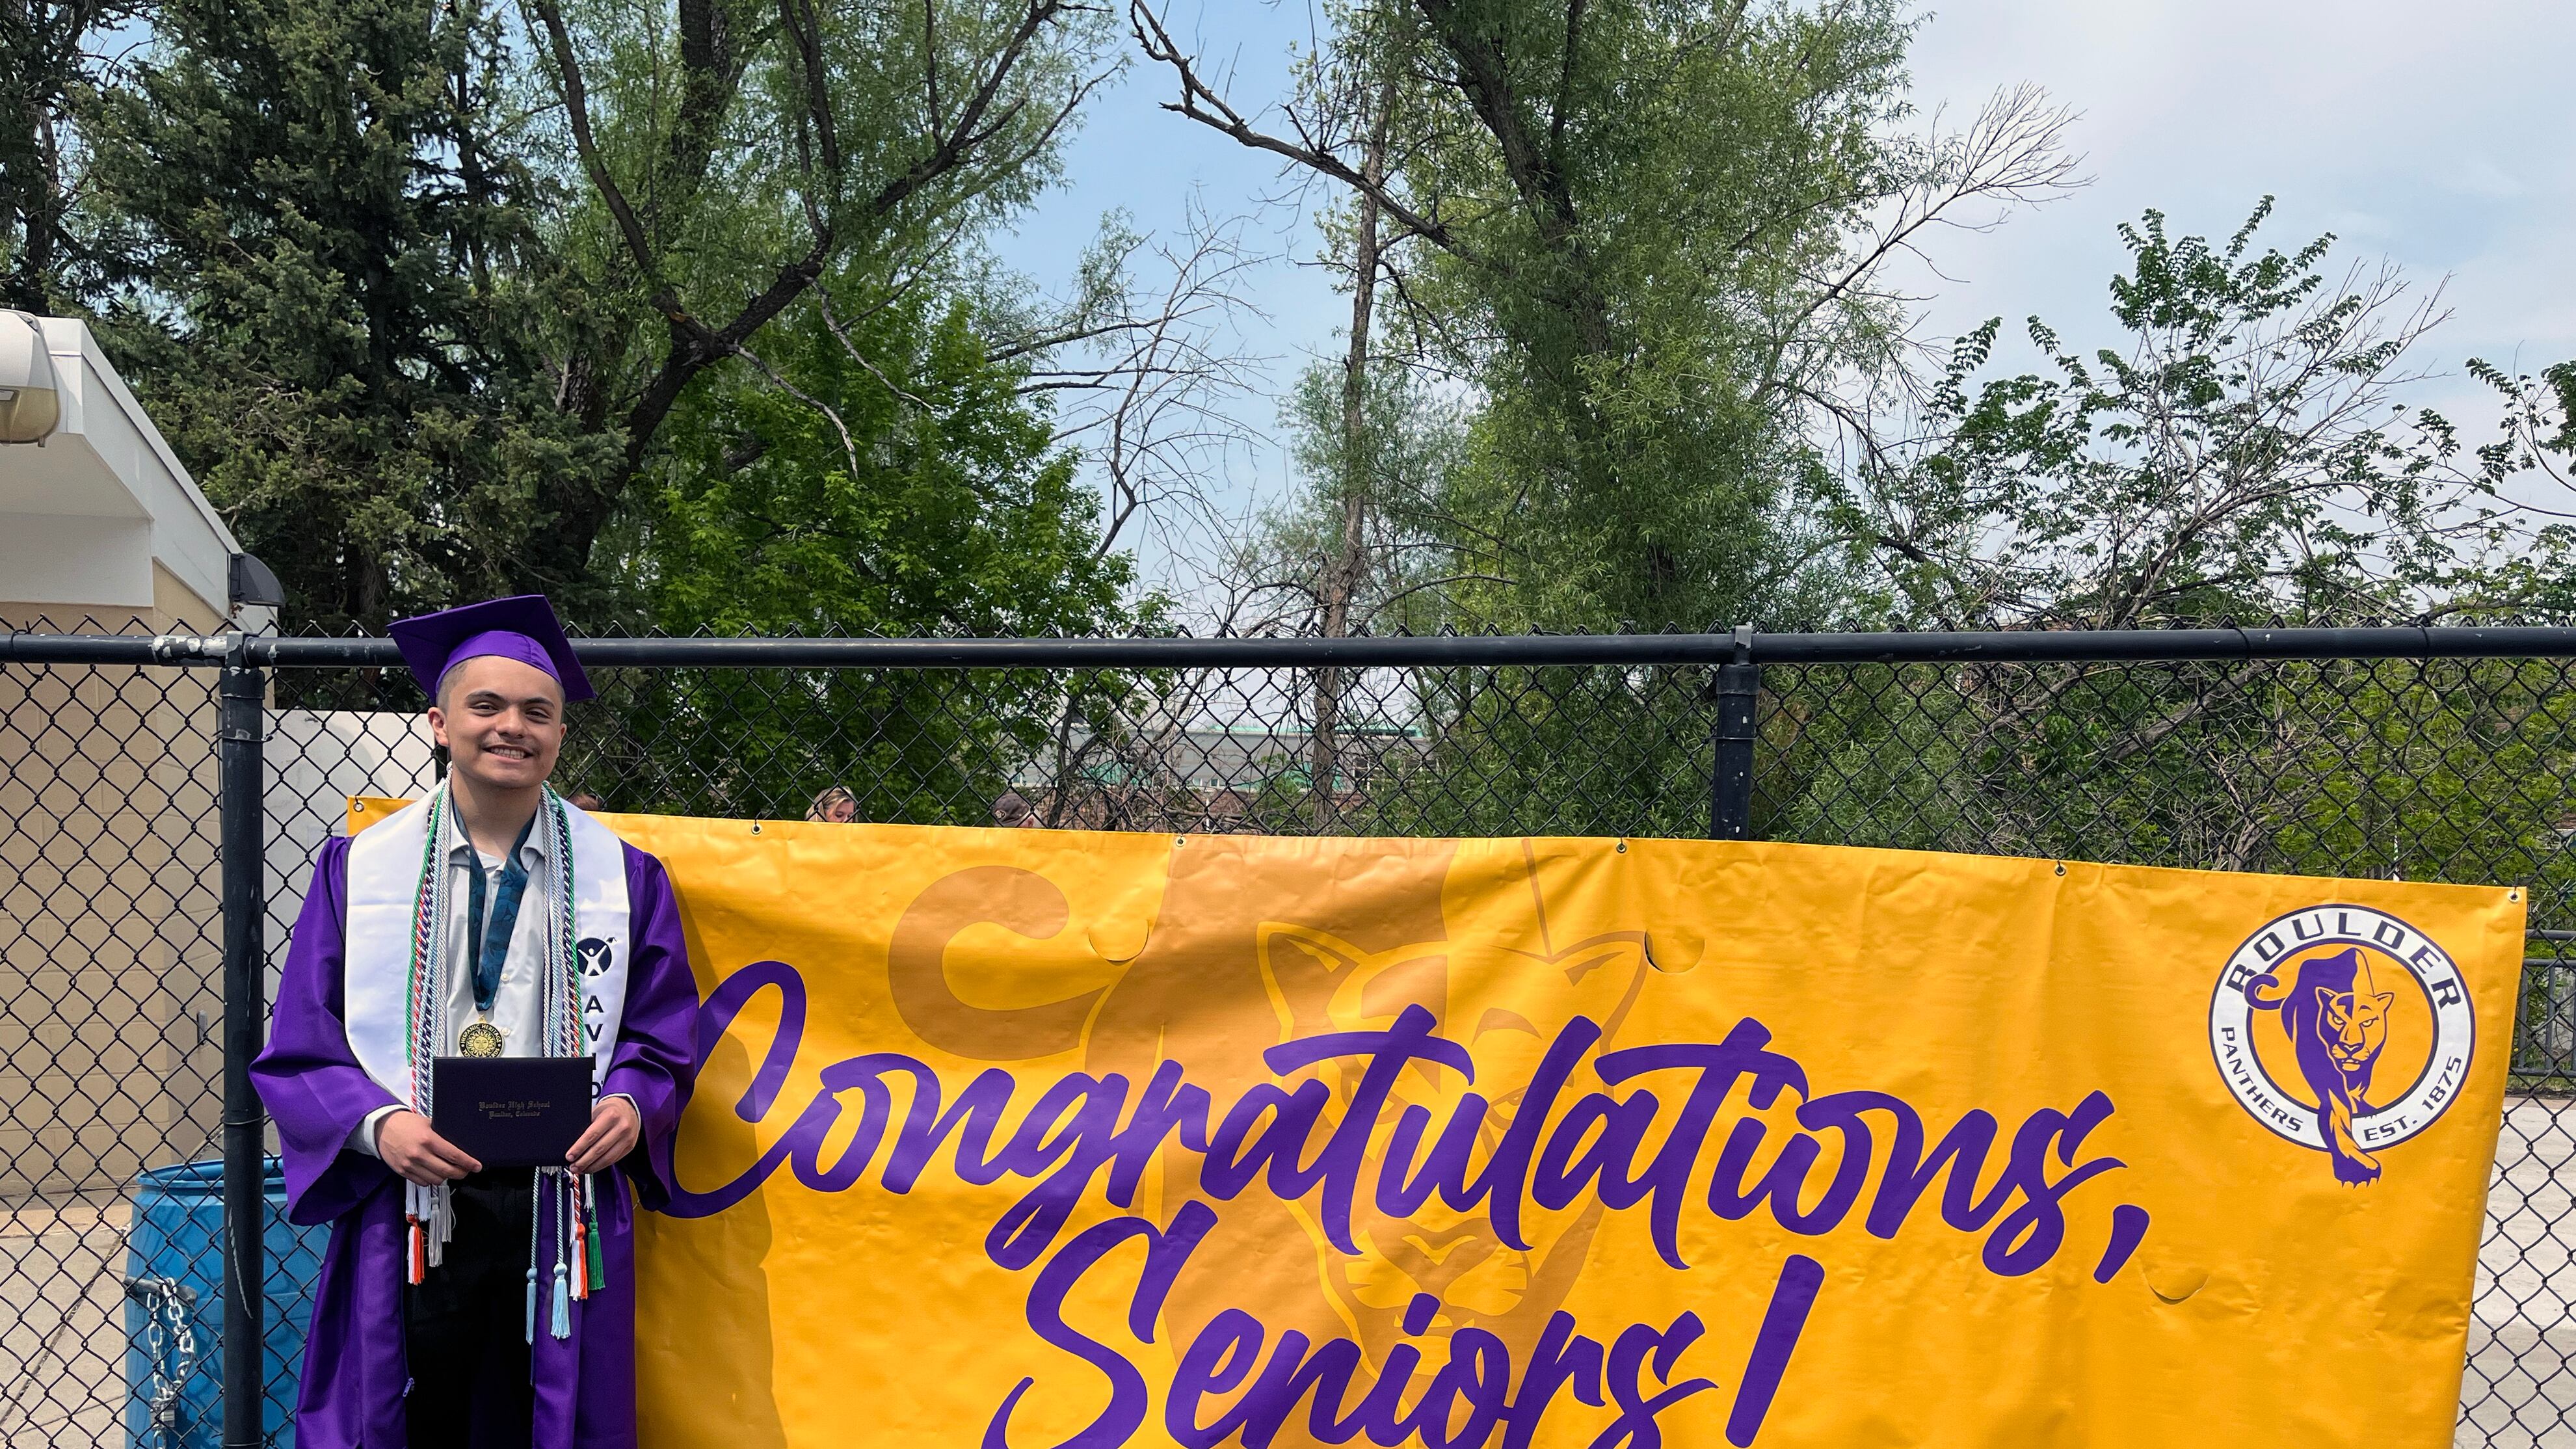 A high school senior wears dark purple graduation gown and hat while holding a diploma next to a large yellow sign that reads "Congratulations, Seniors!"